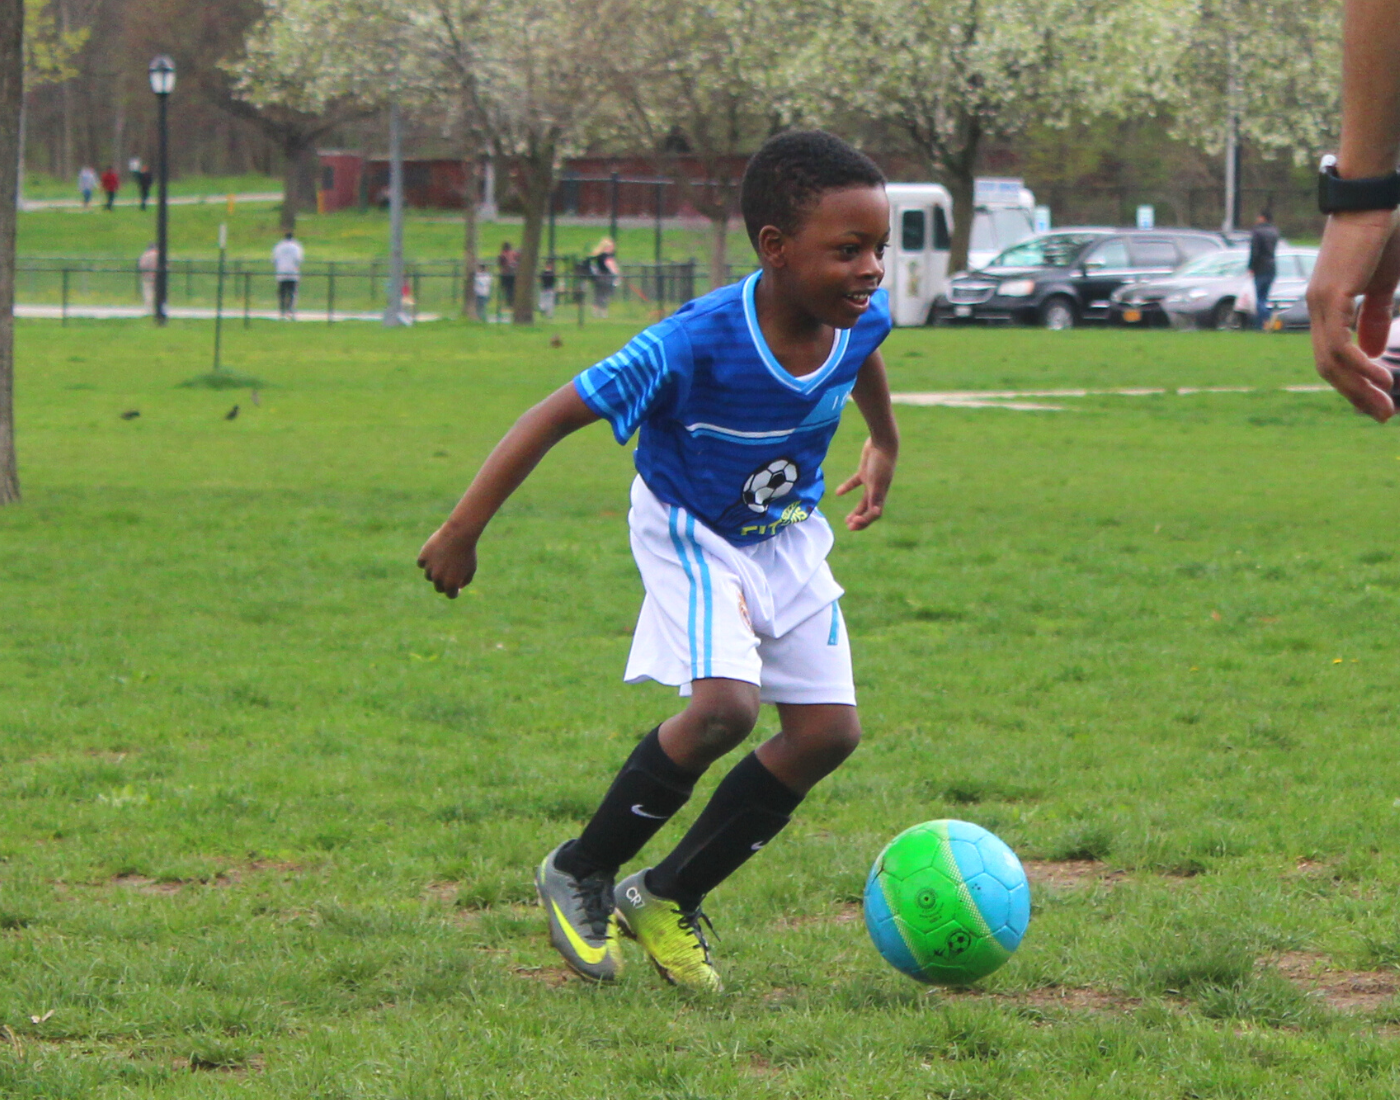 Is soccer the best introductory sport for kids?